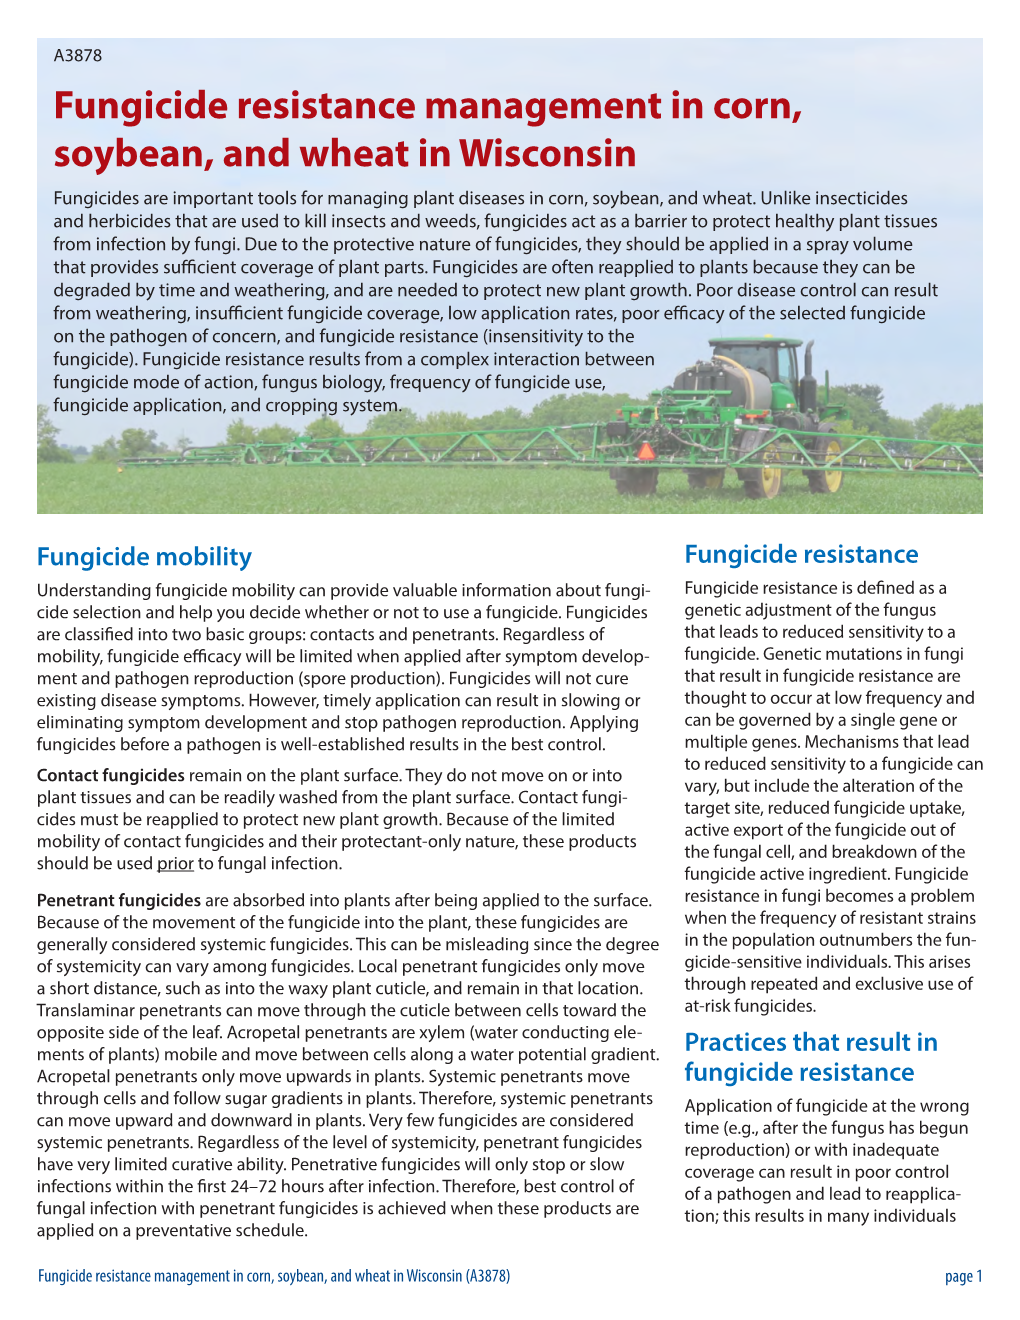 Fungicide Resistance Management in Corn, Soybean, and Wheat in Wisconsin Fungicides Are Important Tools for Managing Plant Diseases in Corn, Soybean, and Wheat